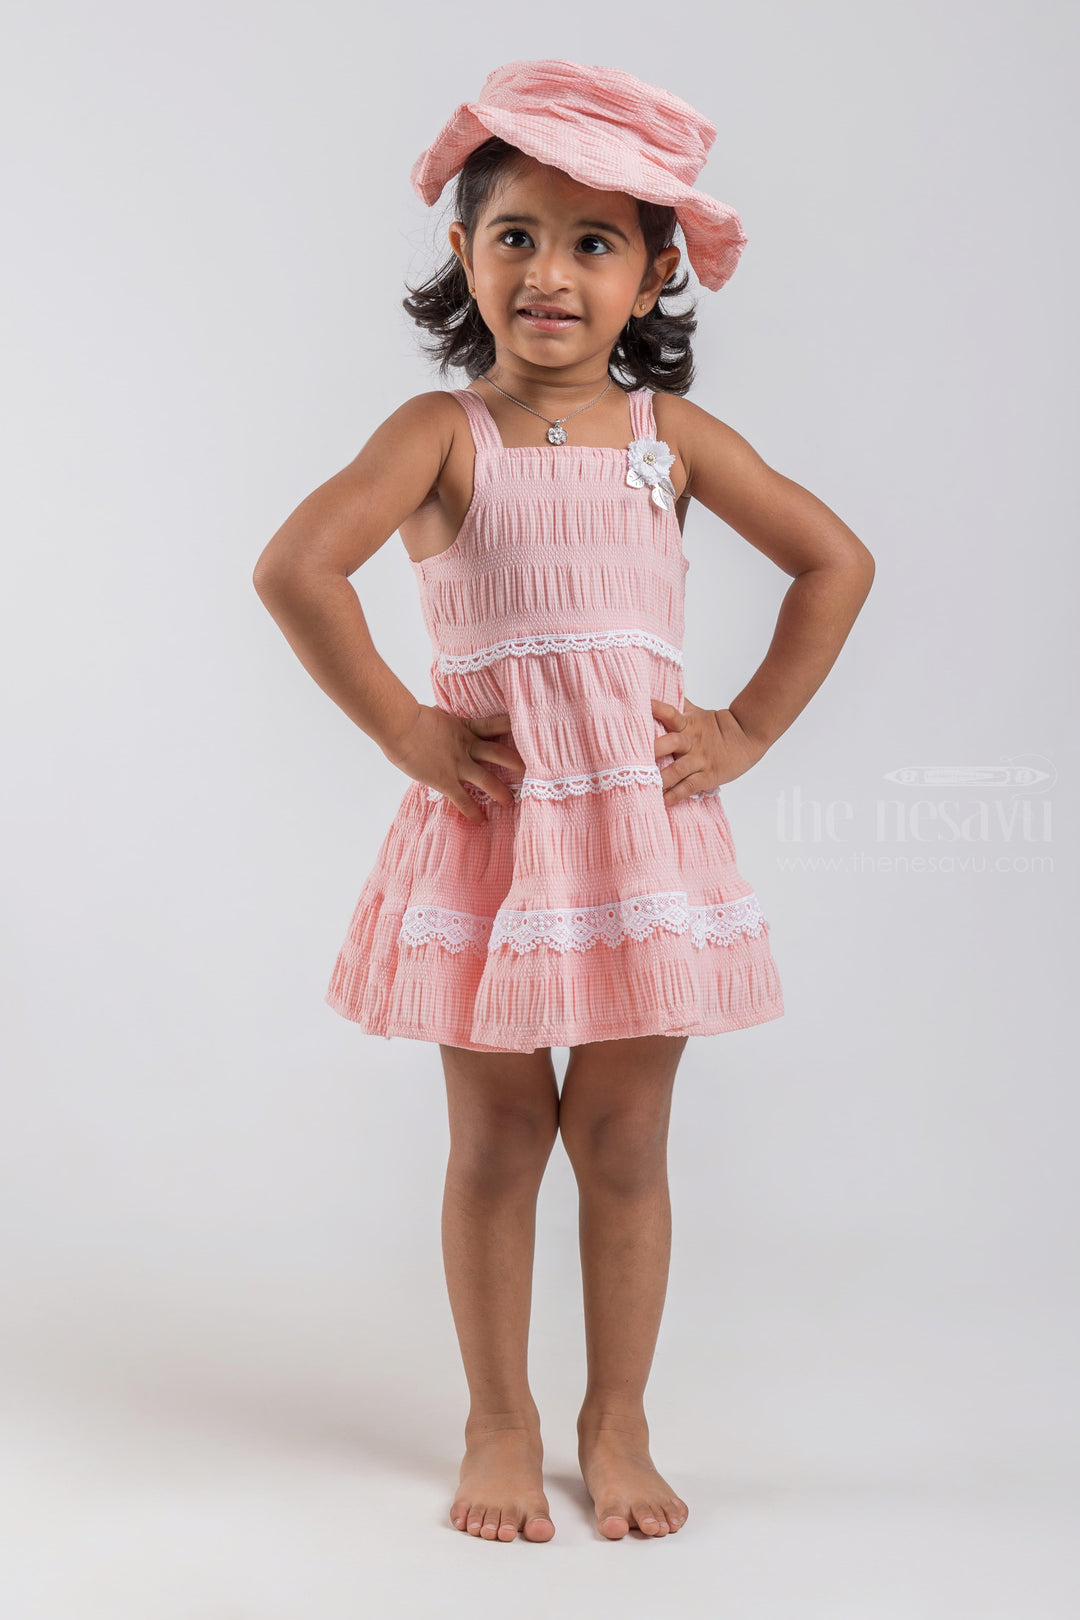 The Nesavu Baby Cotton Frocks Salmon Pink Sleeveless Layered Cotton Frock with Embellished Lace and Flower Applique for Baby Girls and Cap psr silks Nesavu 14 (6M) / Salmon / Cotton BFJ404A